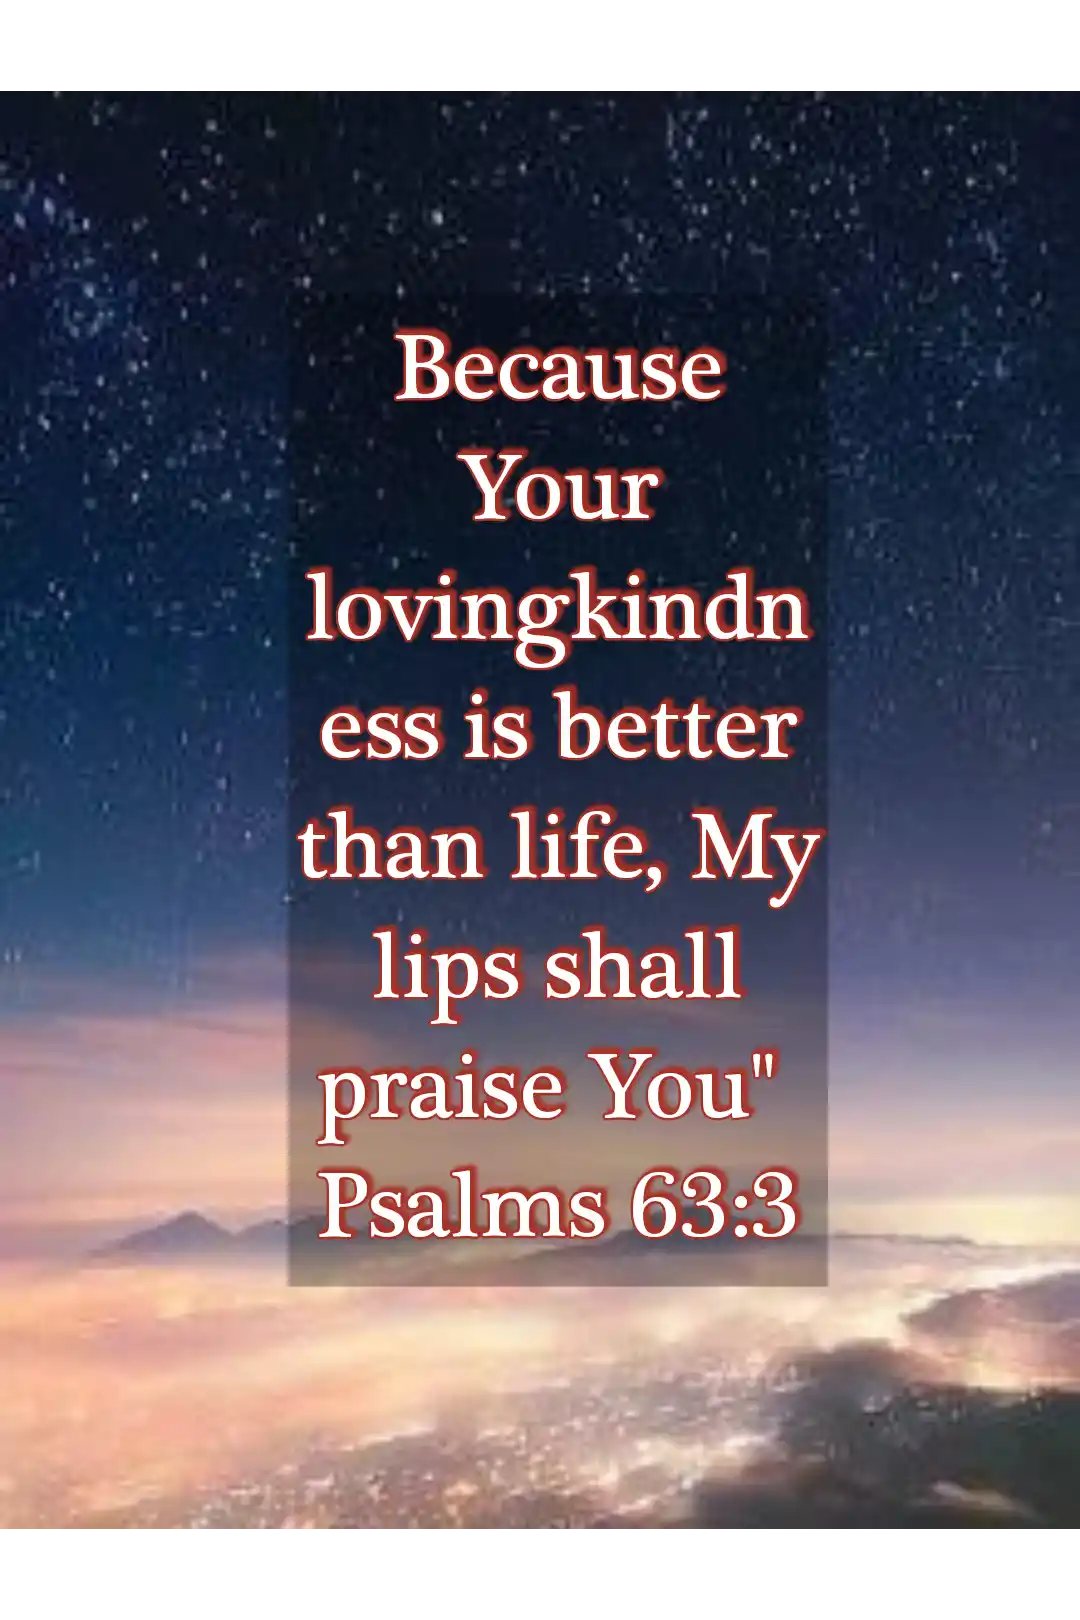 Bible verses about god’s love for us (Psalm 63:3)